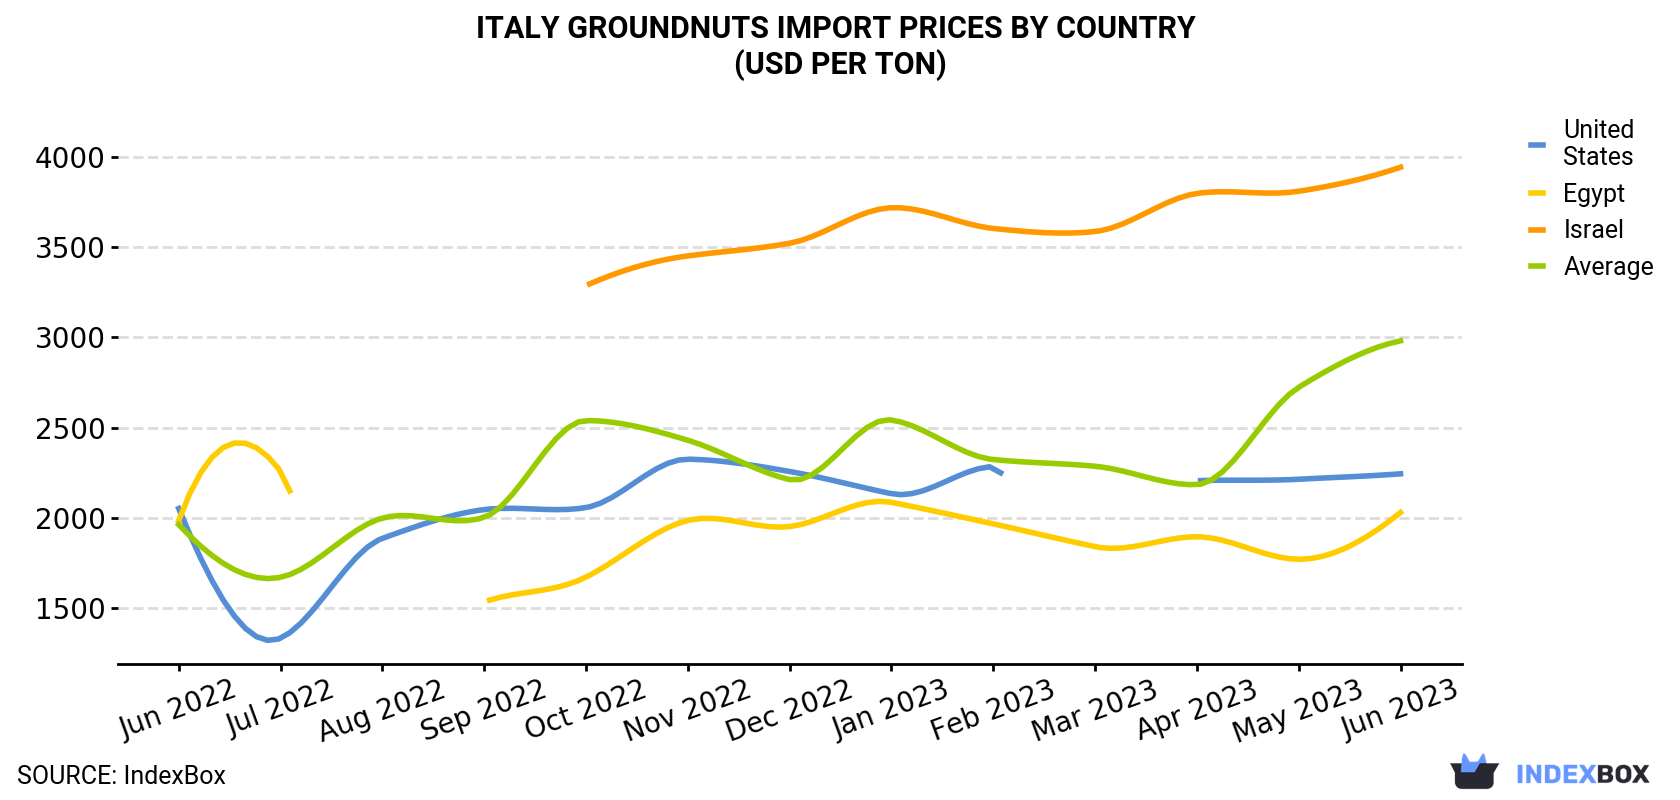 Italy Groundnuts Import Prices By Country (USD Per Ton)